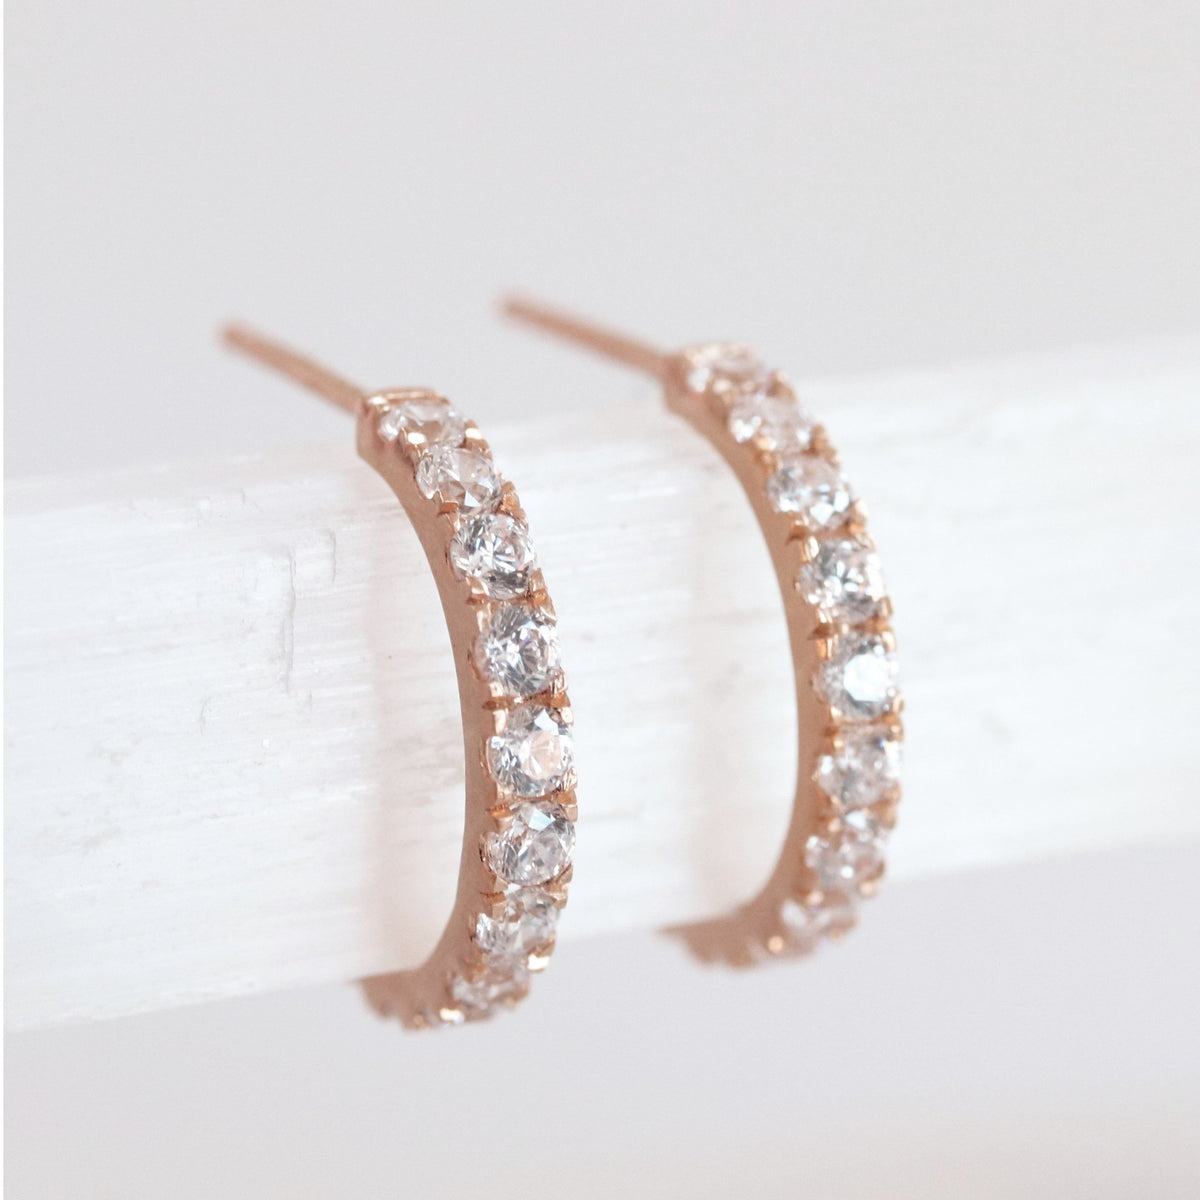 LOVE HUGGIE HOOPS - CUBIC ZIRCONIA &amp; ROSE GOLD - SO PRETTY CARA COTTER